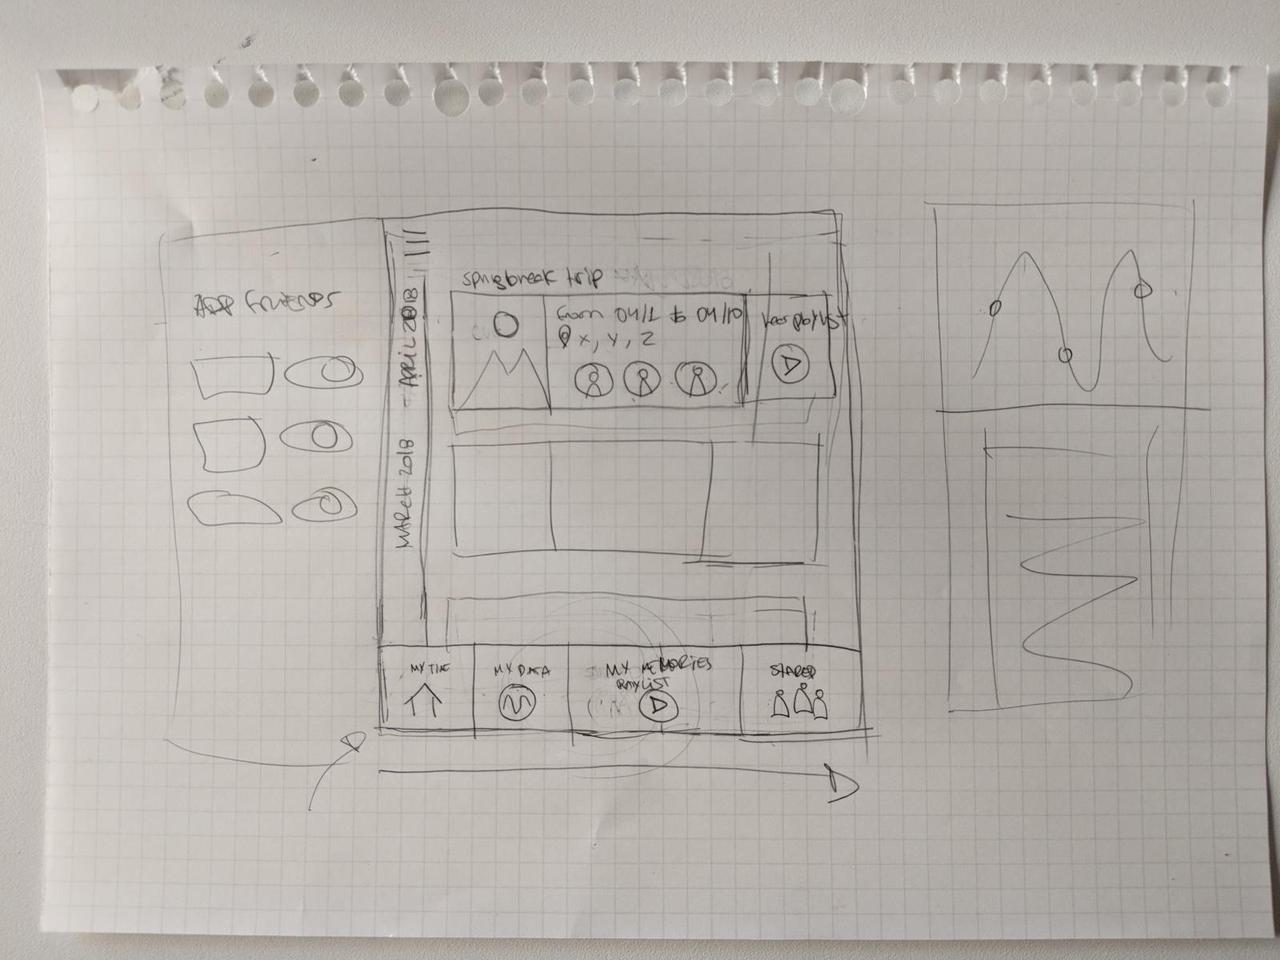 rough prototype drawing of application screen, with navigation buttons at the bottom and photos from the trip in the center.